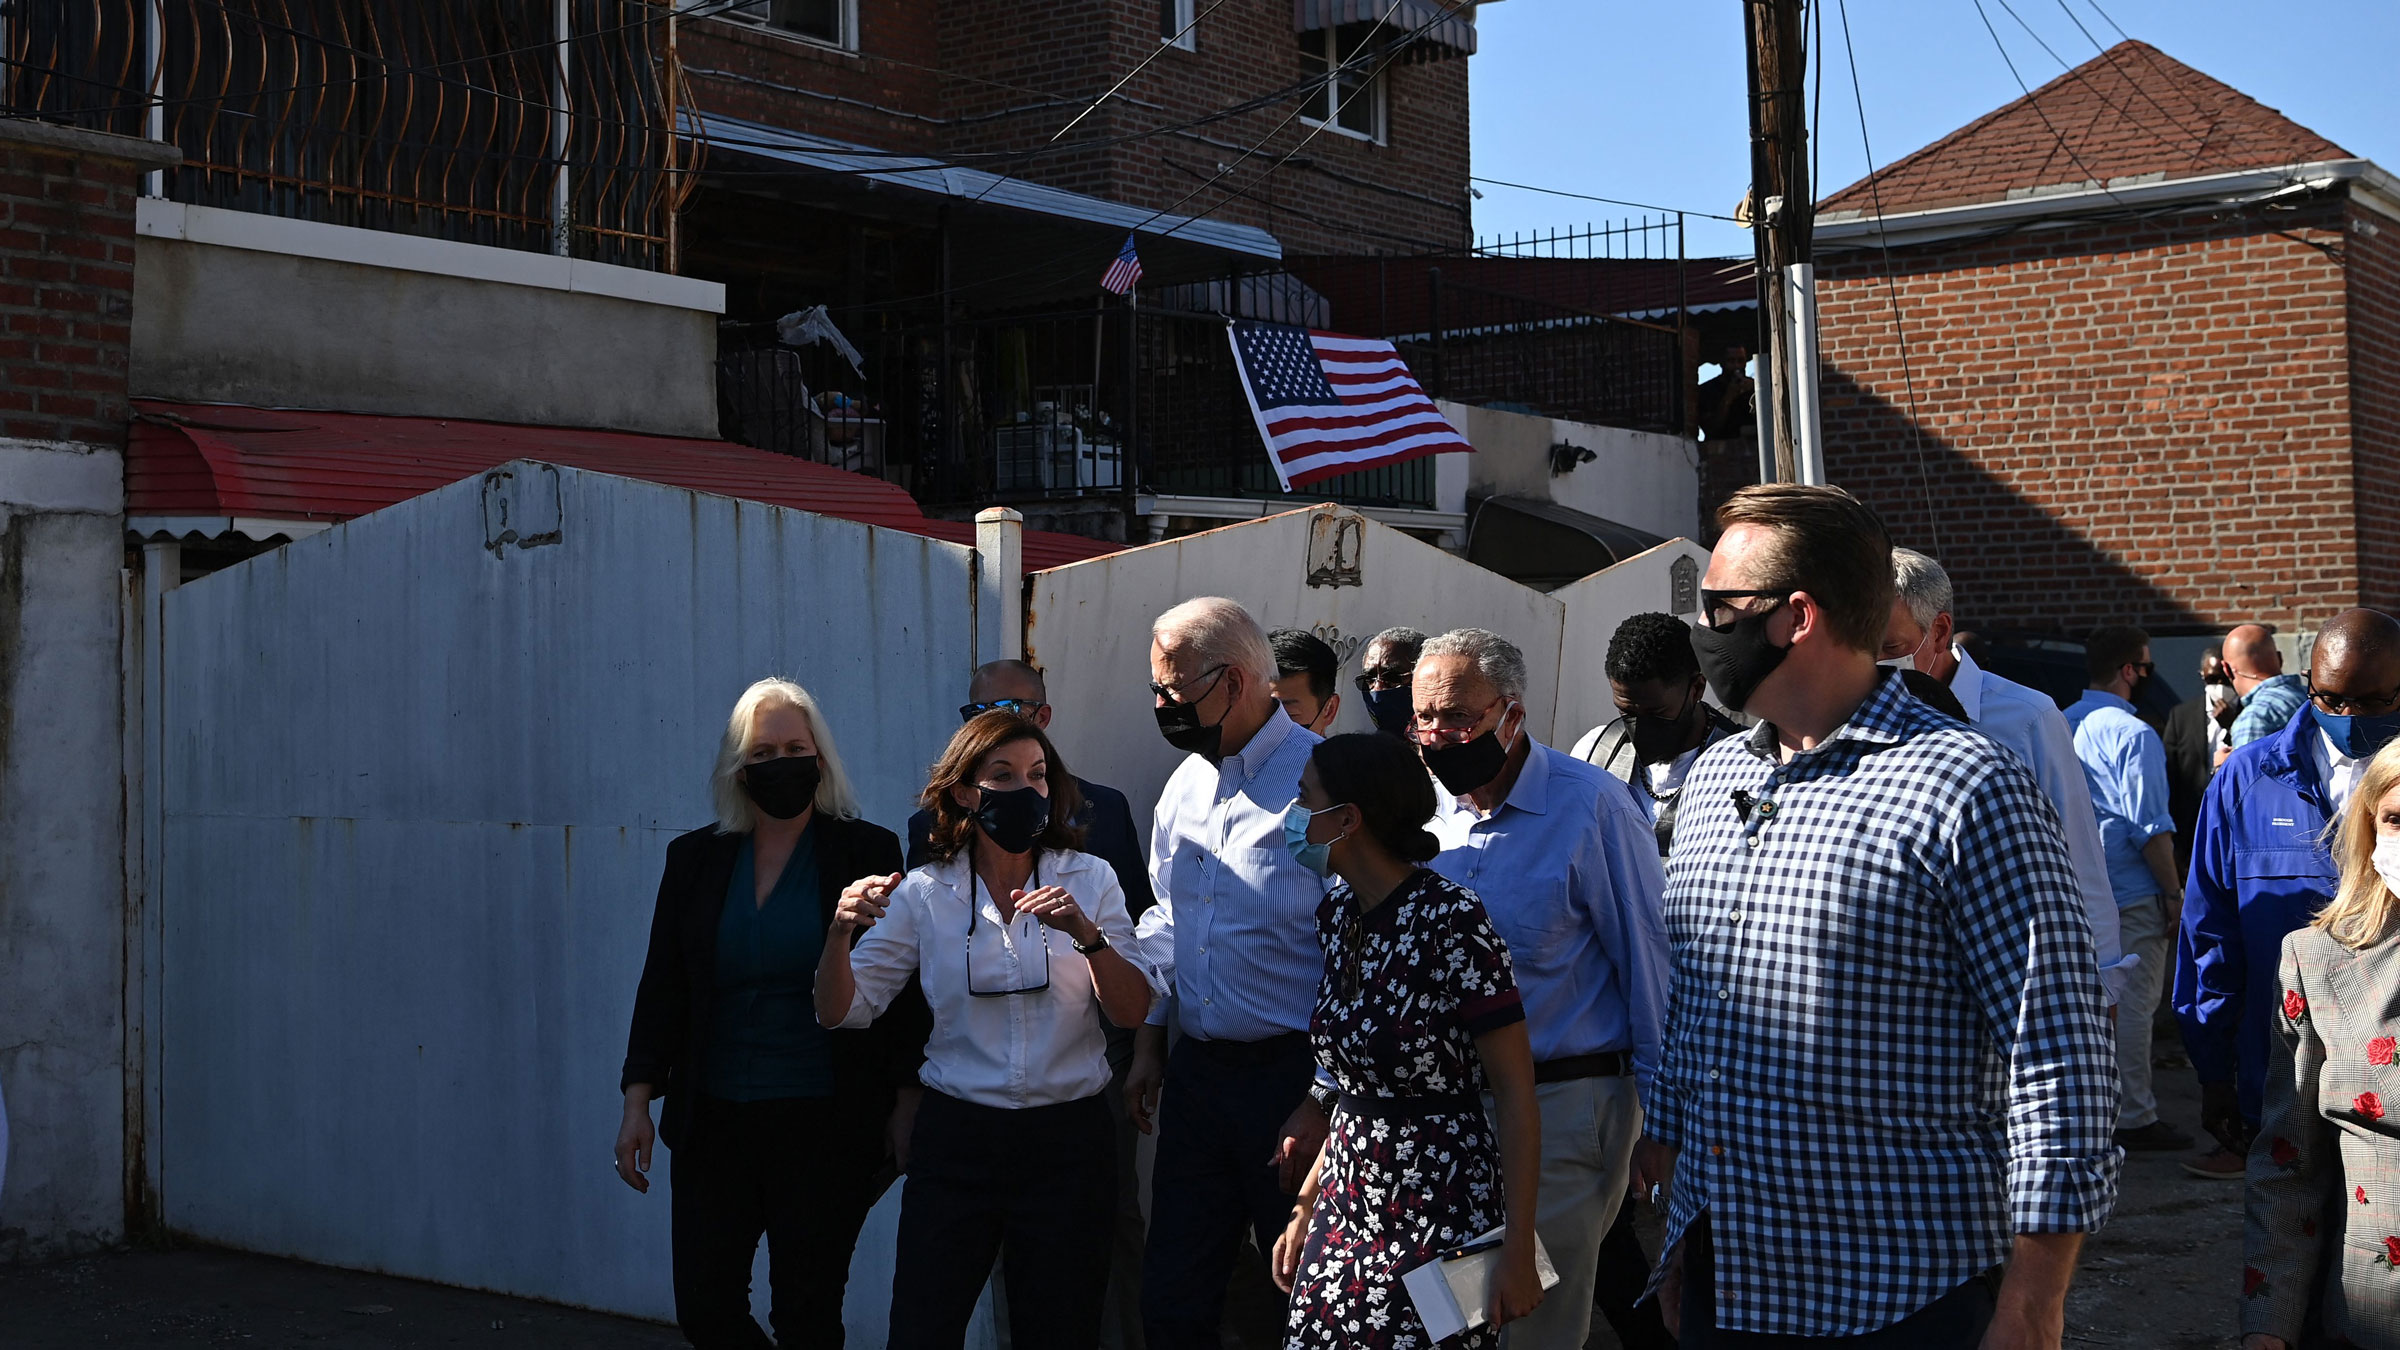 President Joe Biden talks with New York Gov. Kathy Hochul as he tours an Ida-affected neighborhood in Queens, New York, on Tuesday. Also walking with Biden are US Rep. Alexandria Ocasio-Cortez and US Sens. Kirsten Gillibrand and Chuck Schumer.